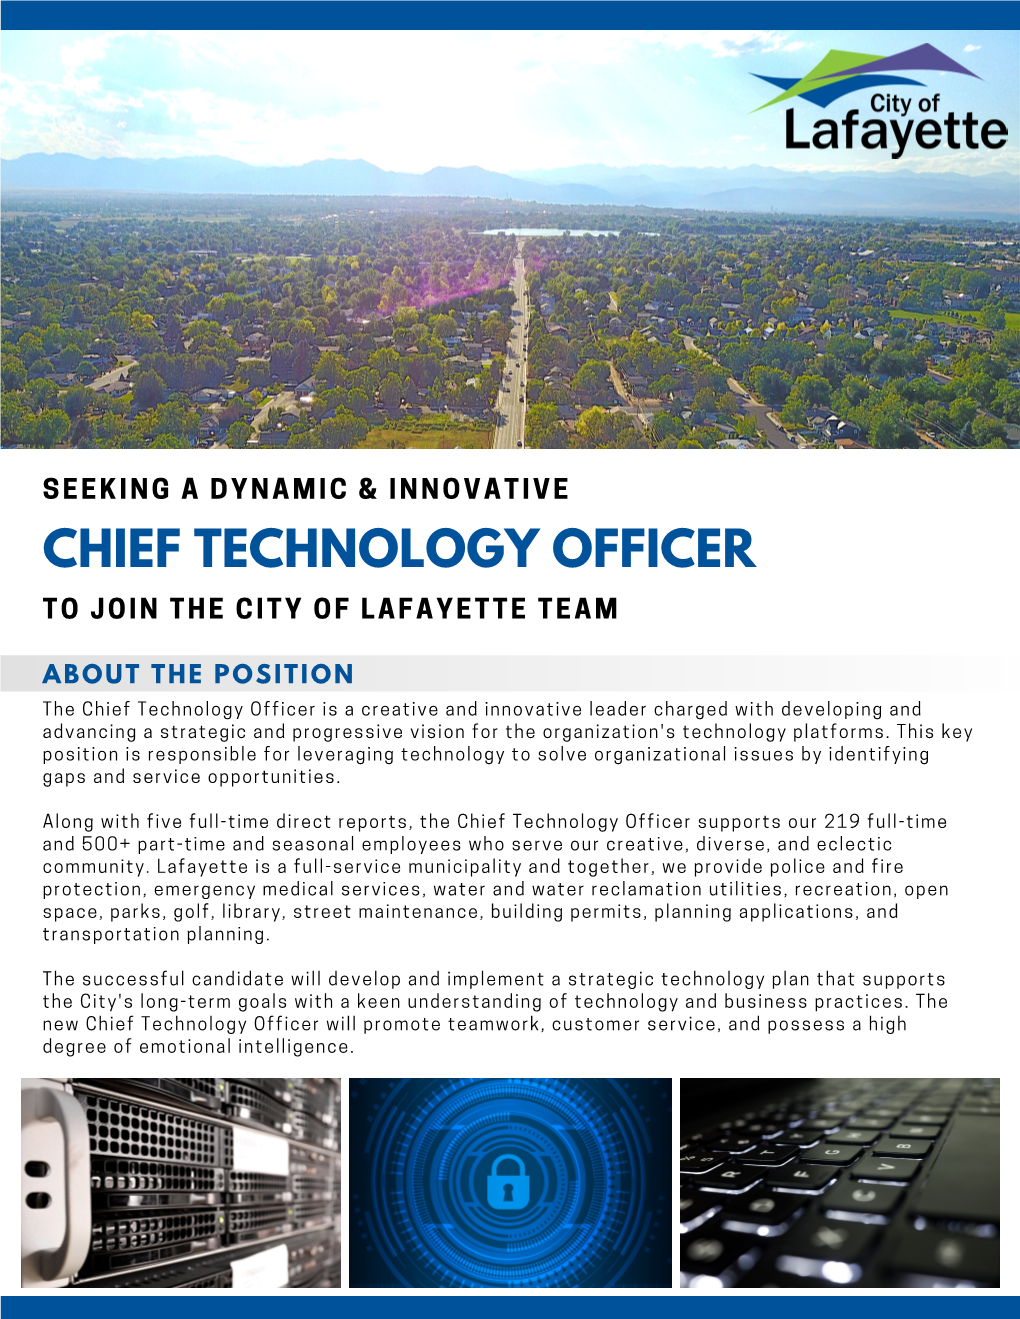 Chief Technology Officer to Join the City of Lafayette Team